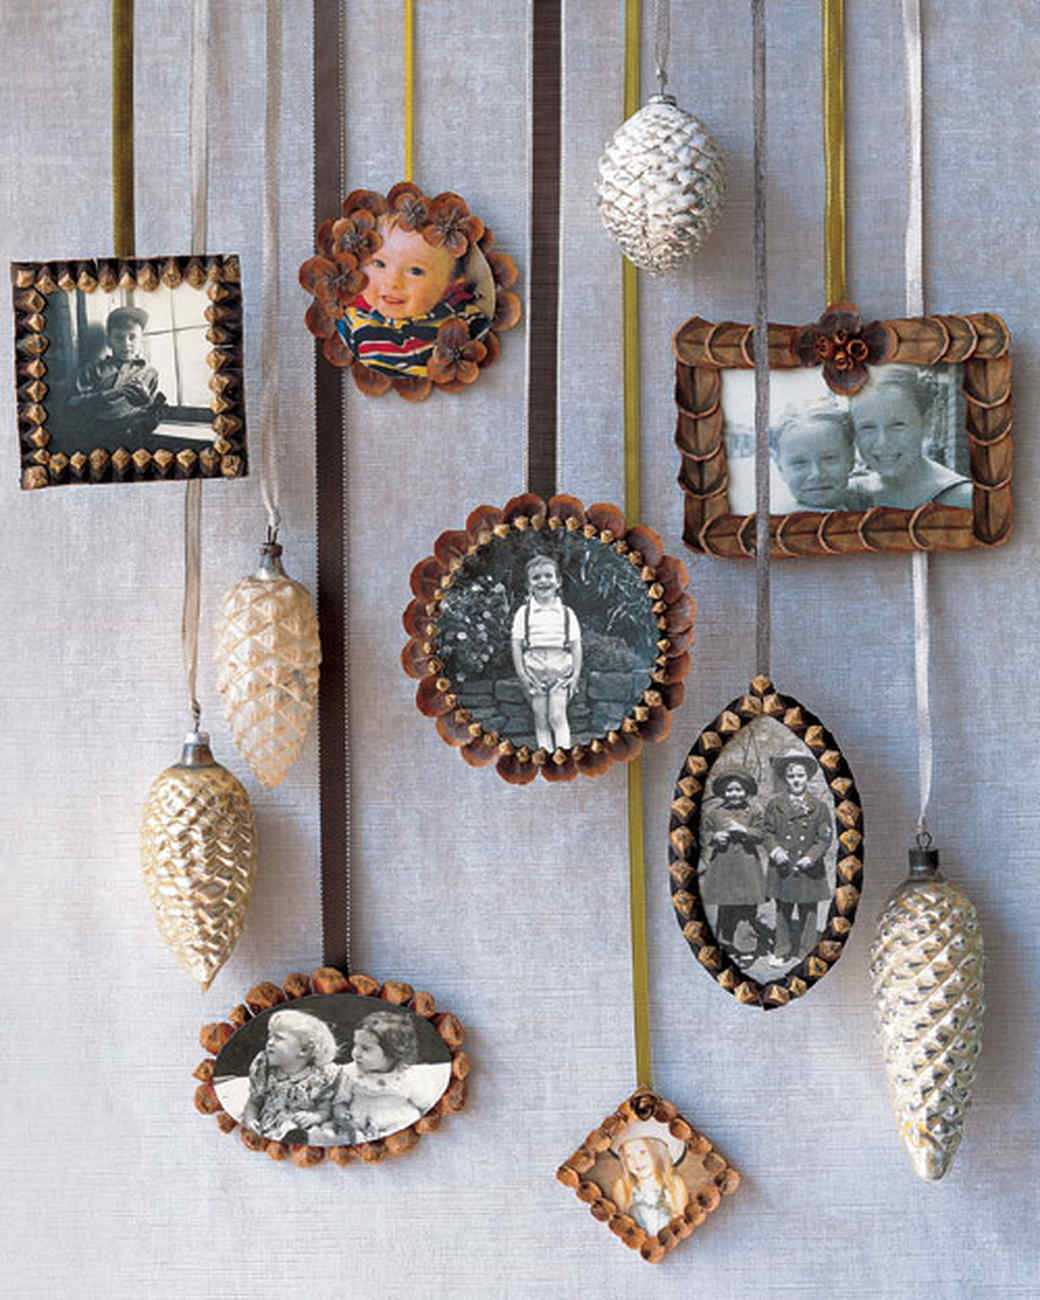 Home Decor Ideas with Pine Cones | Pinecone Crafts to Sell | Hill City Bride